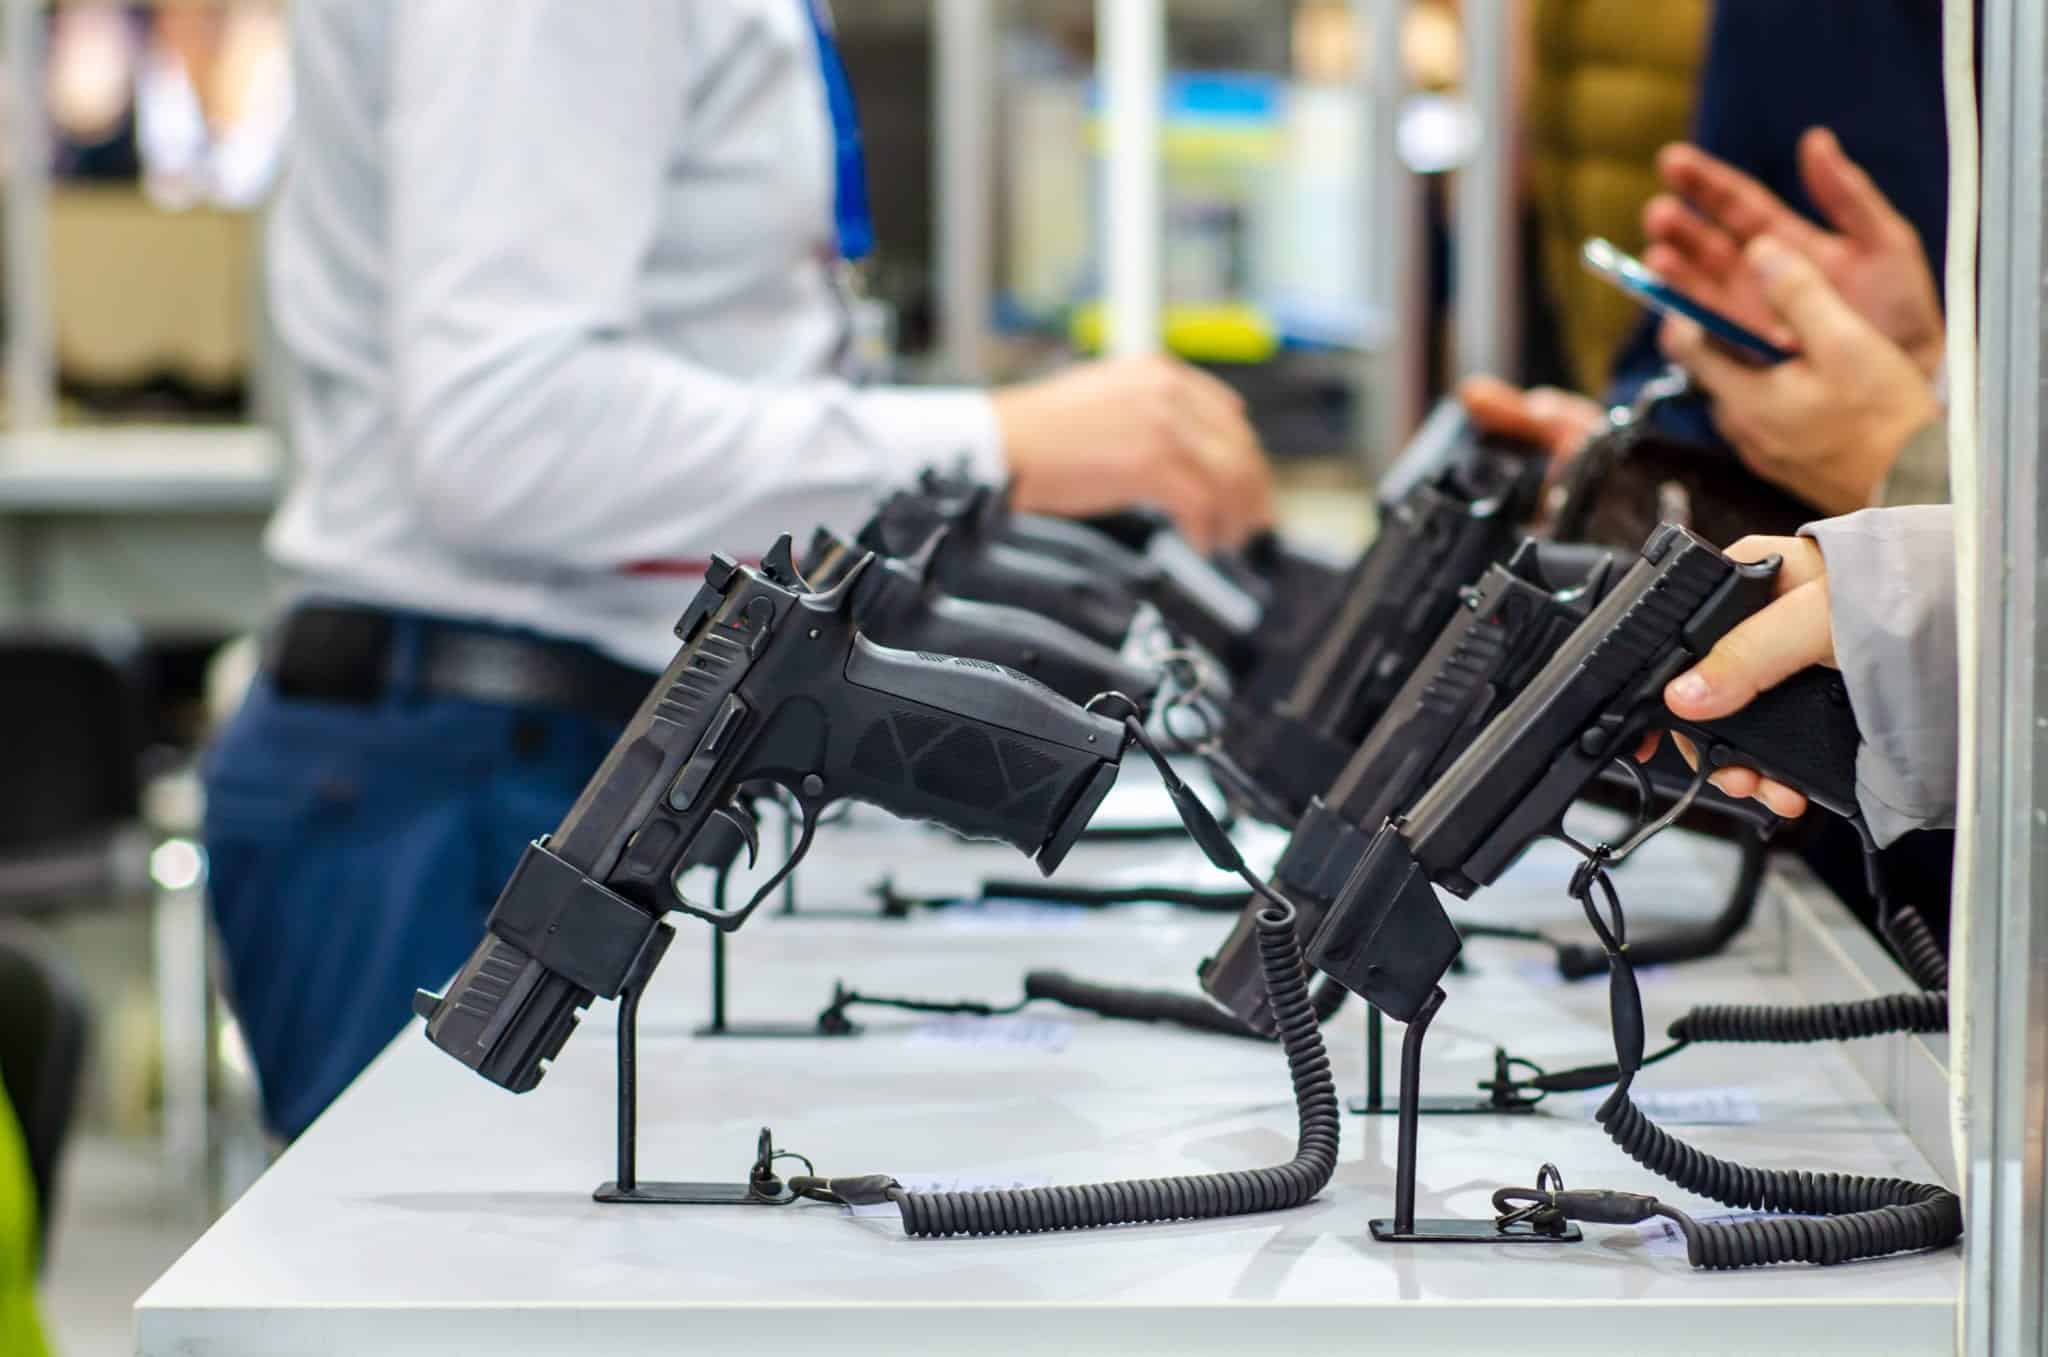 Texas Laws That Gun Dealers Need to Keep in Mind Right Now